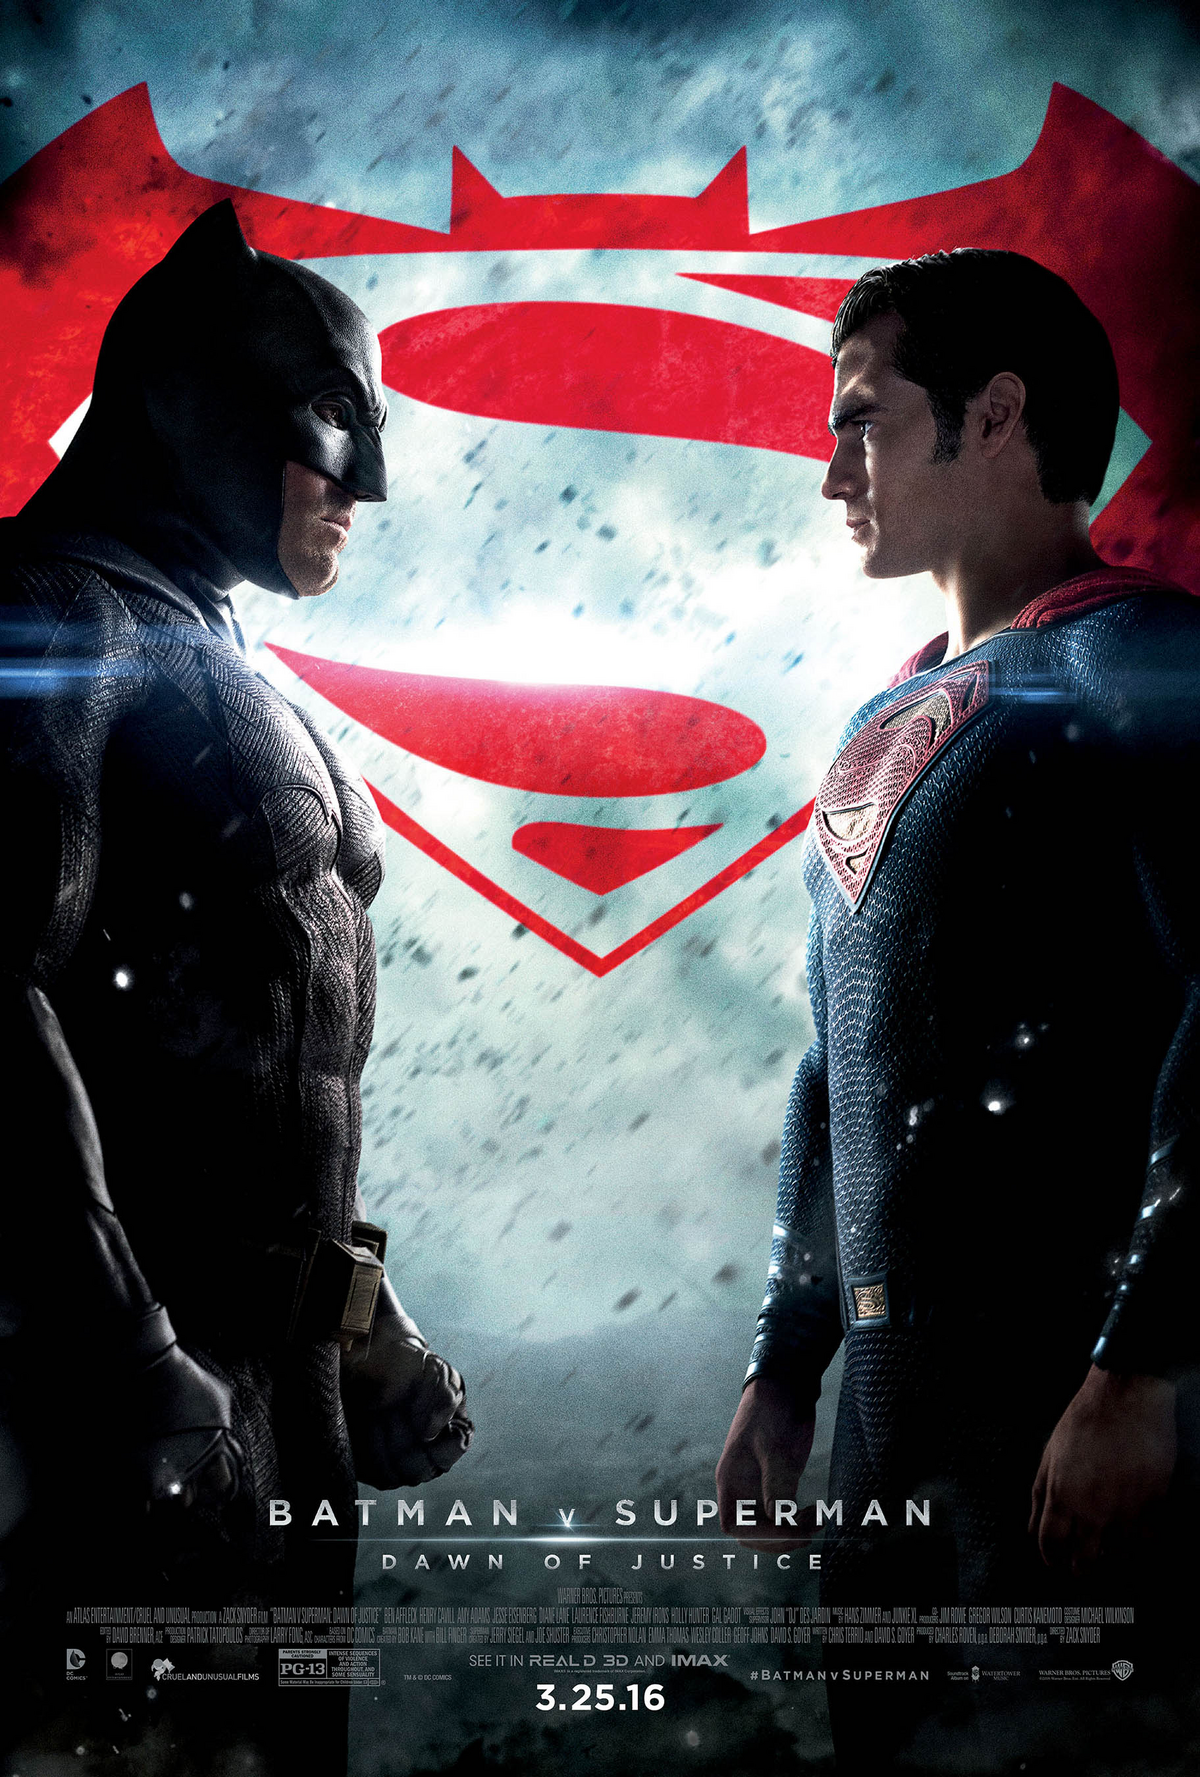 Man of Steel: Christopher Nolan Opposed the Ending, DC Comics Advised on It